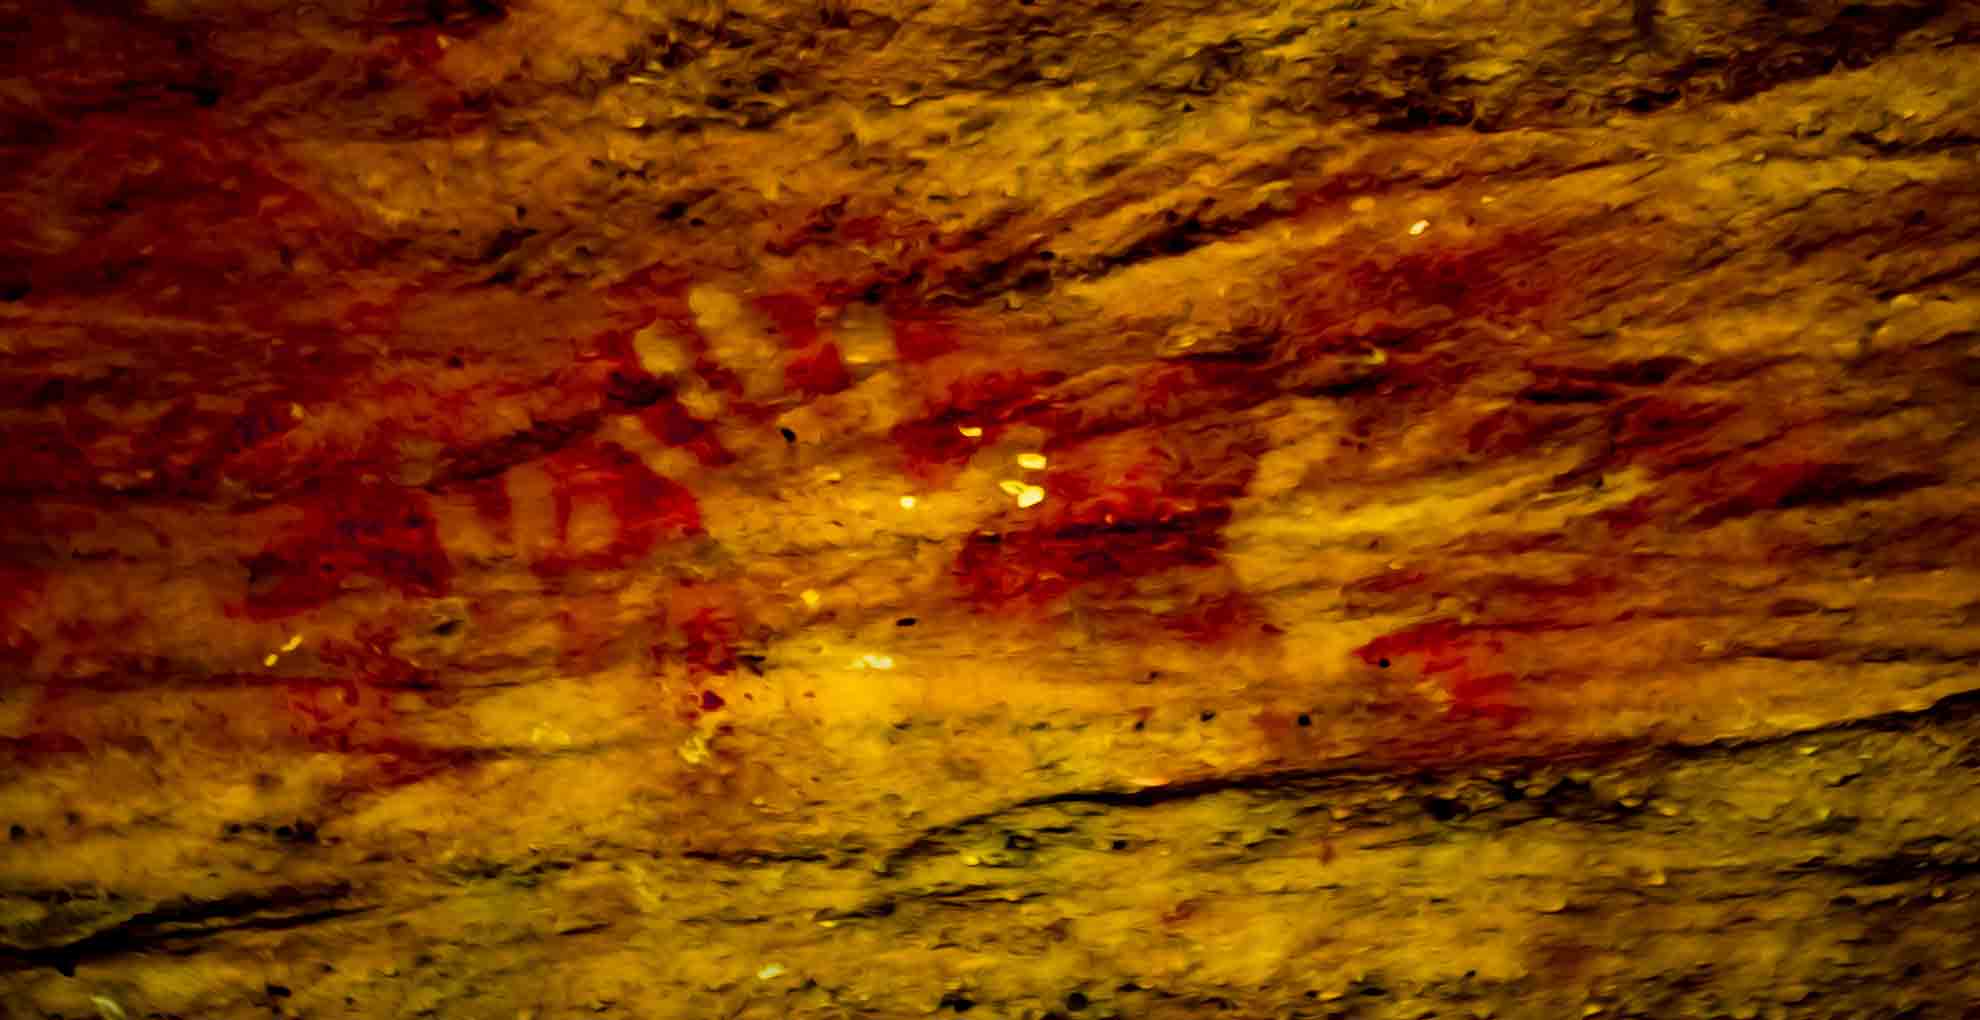 HANDS ON ROCK CAVE ART SACRED INDIGENOUS SITE WIRAJURI NATION 